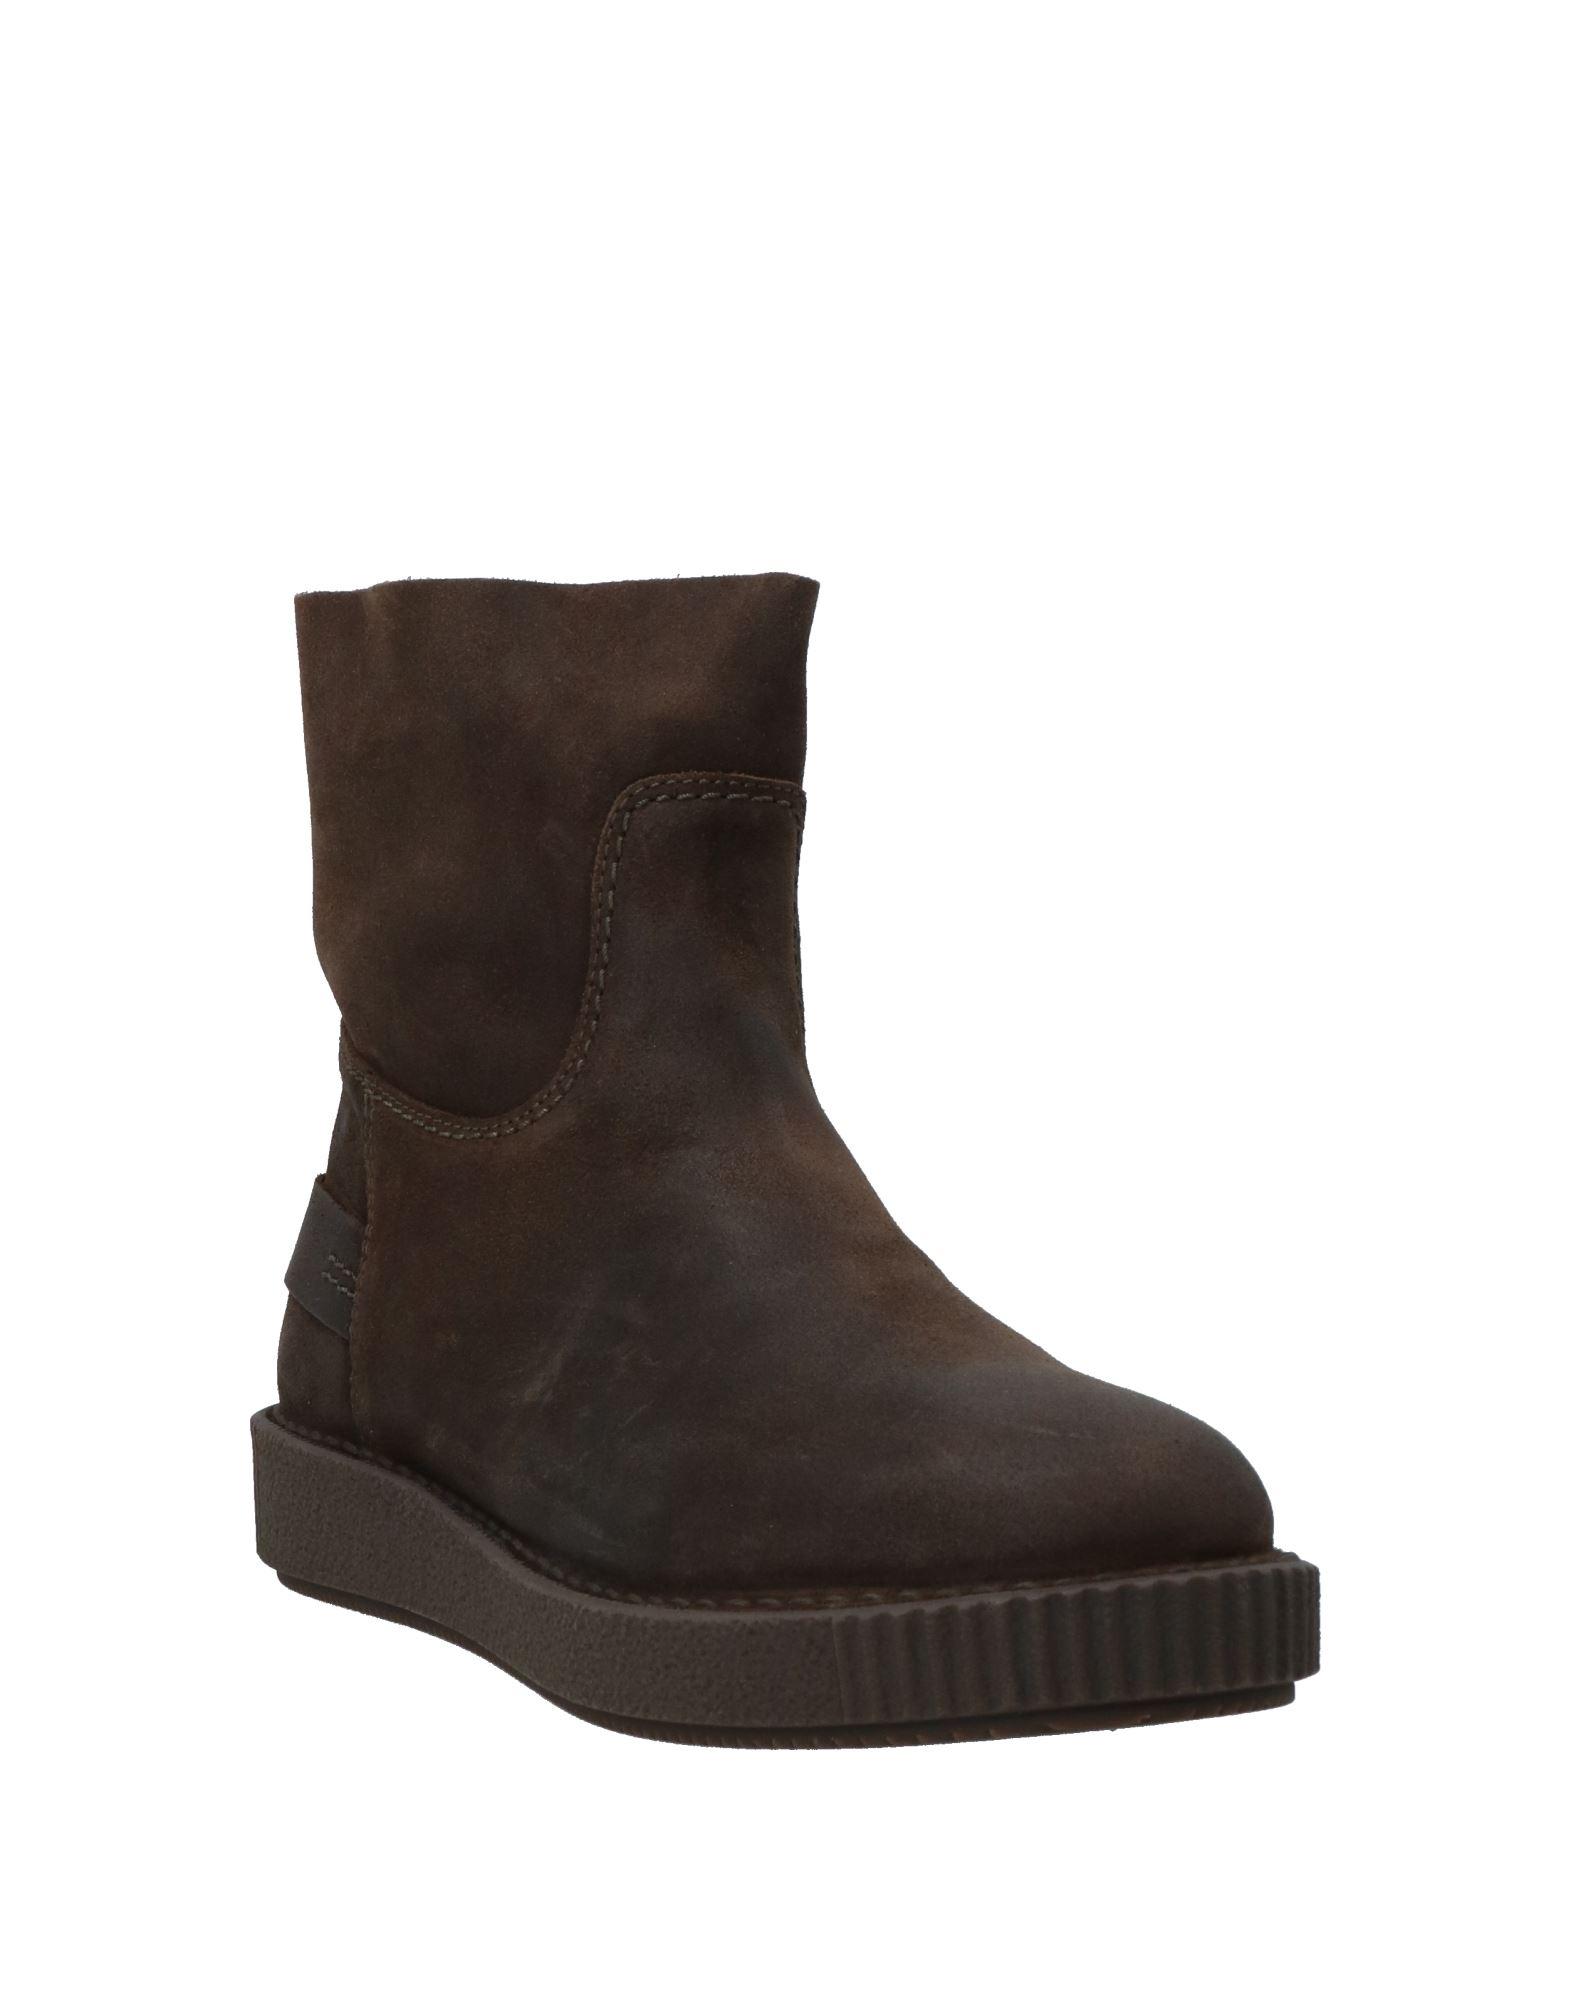 Shabbies Amsterdam Ankle Boots in |